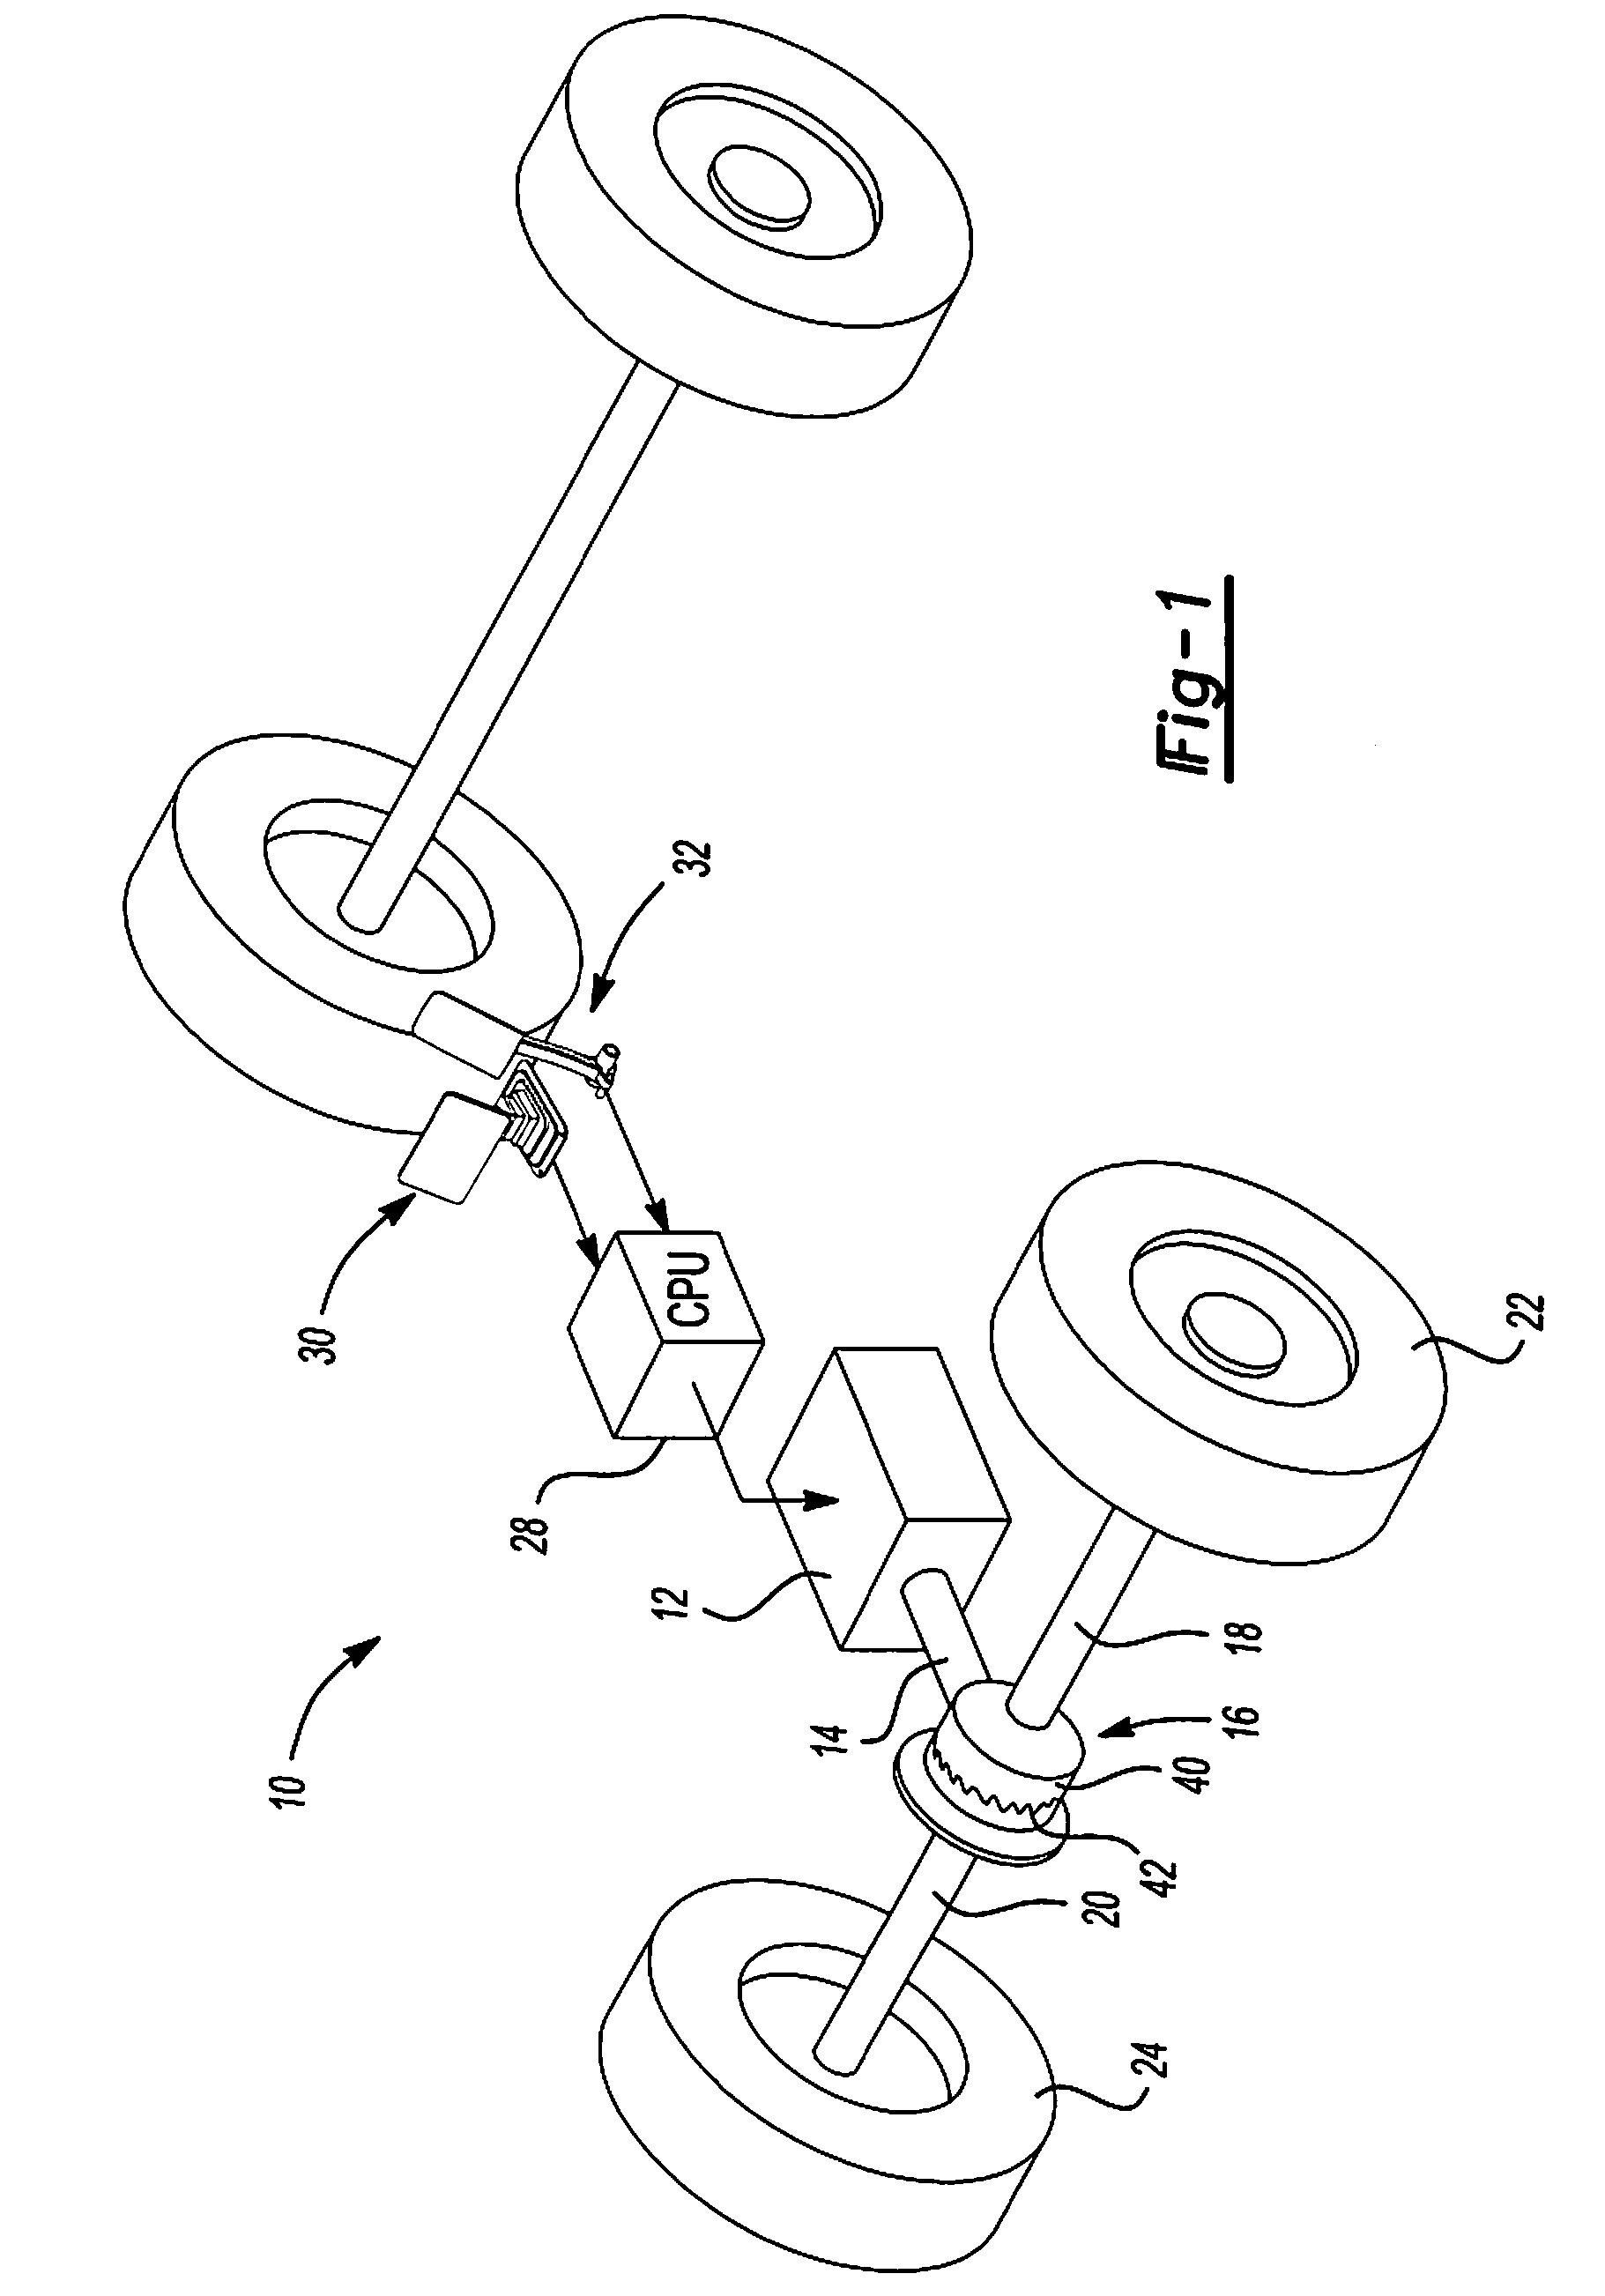 Limited Slip Differential For Electric Vehicle